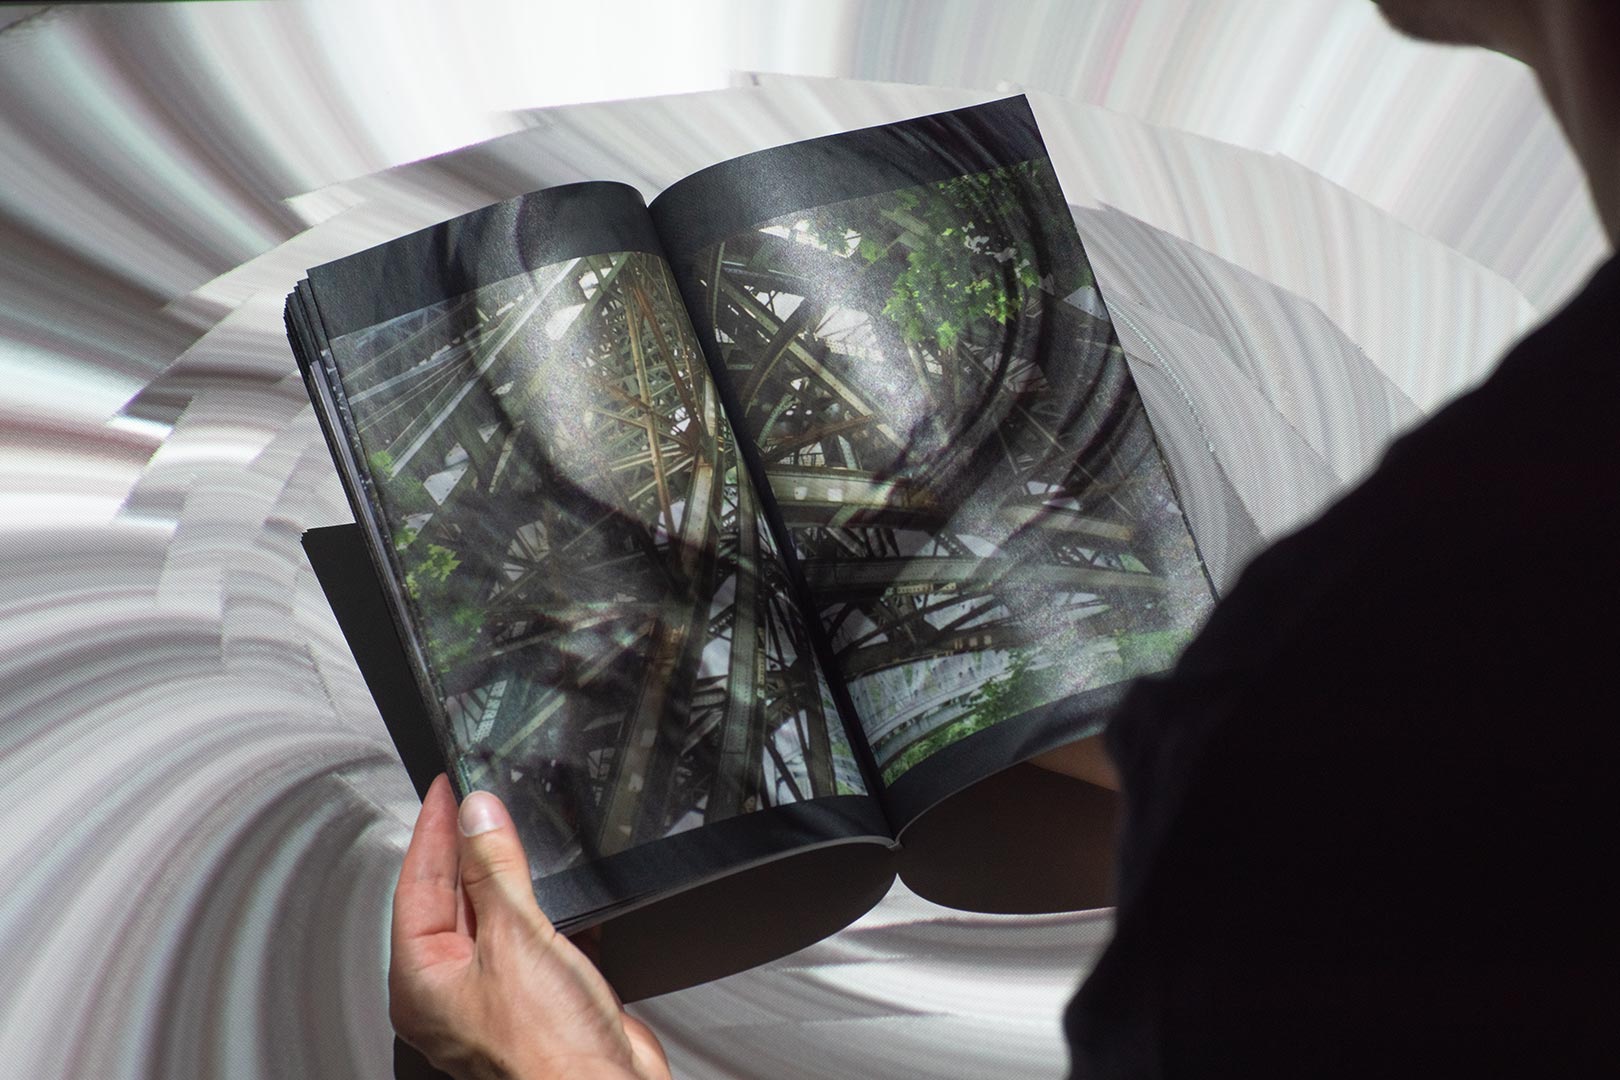 Gallery Refugium book at the exhibiton with projection